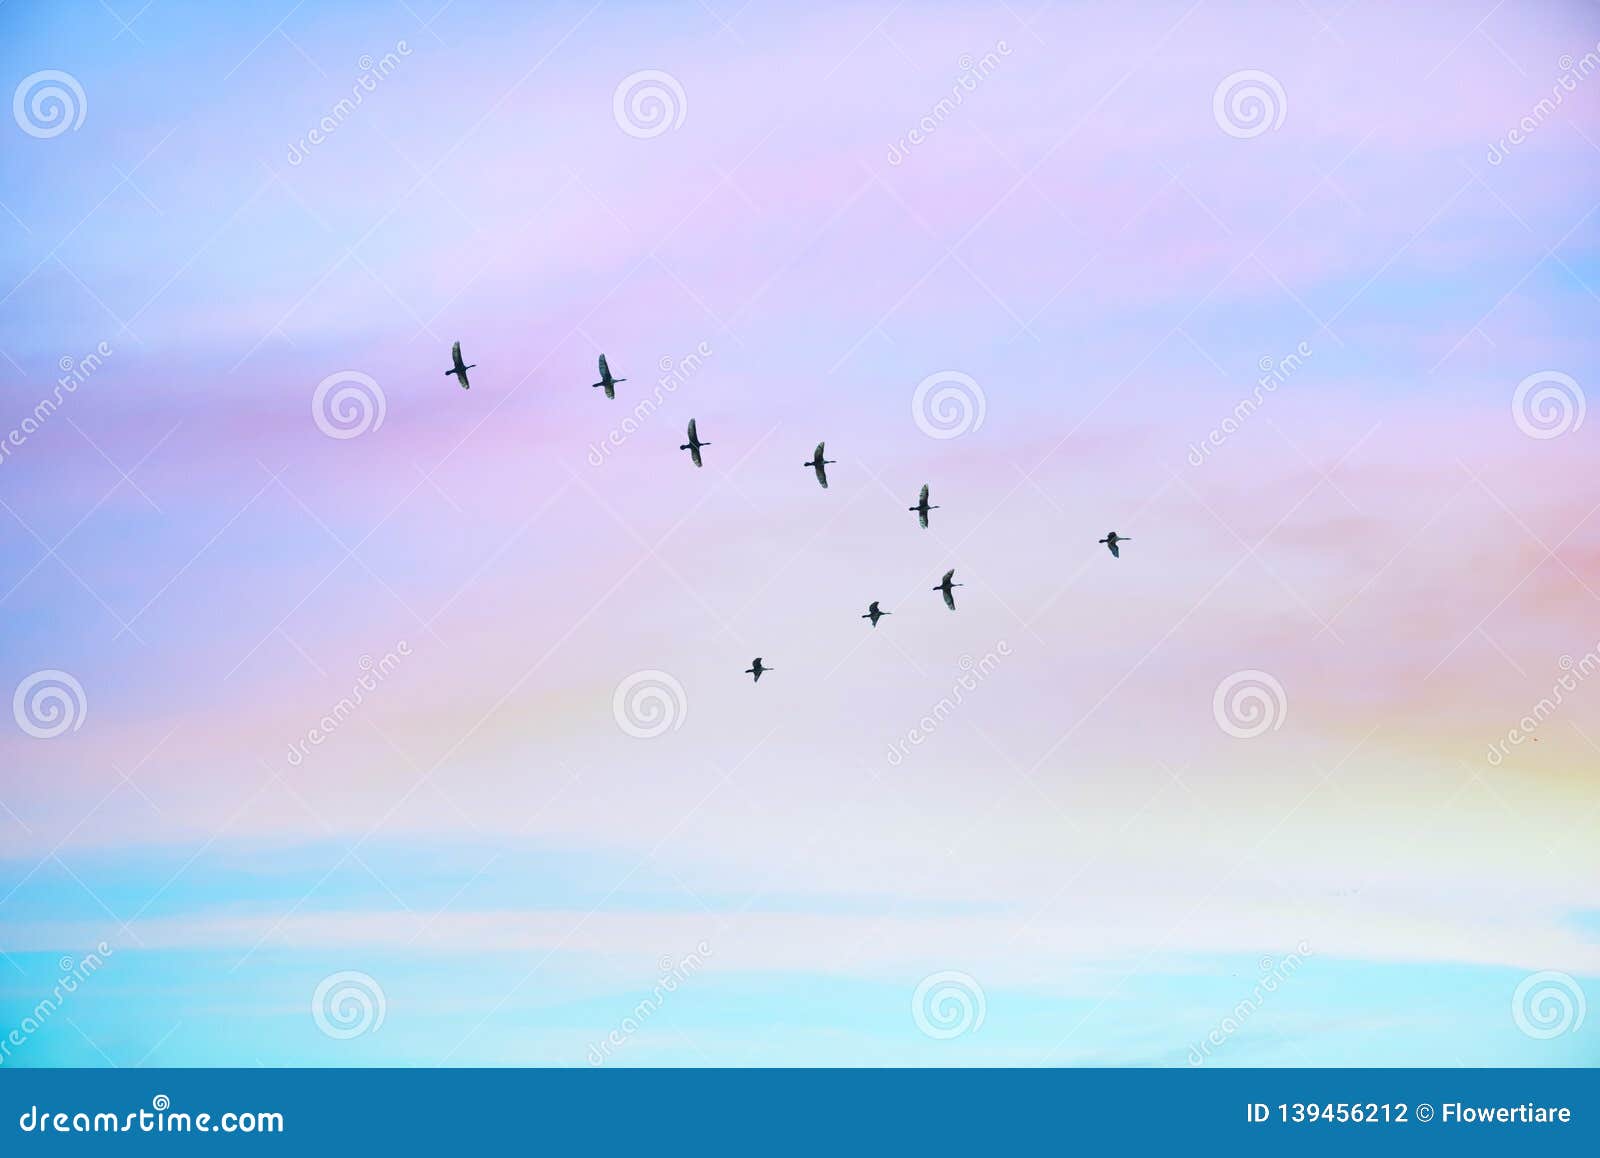 migratory birds flying in the  of v on the cloudy sunset sky.